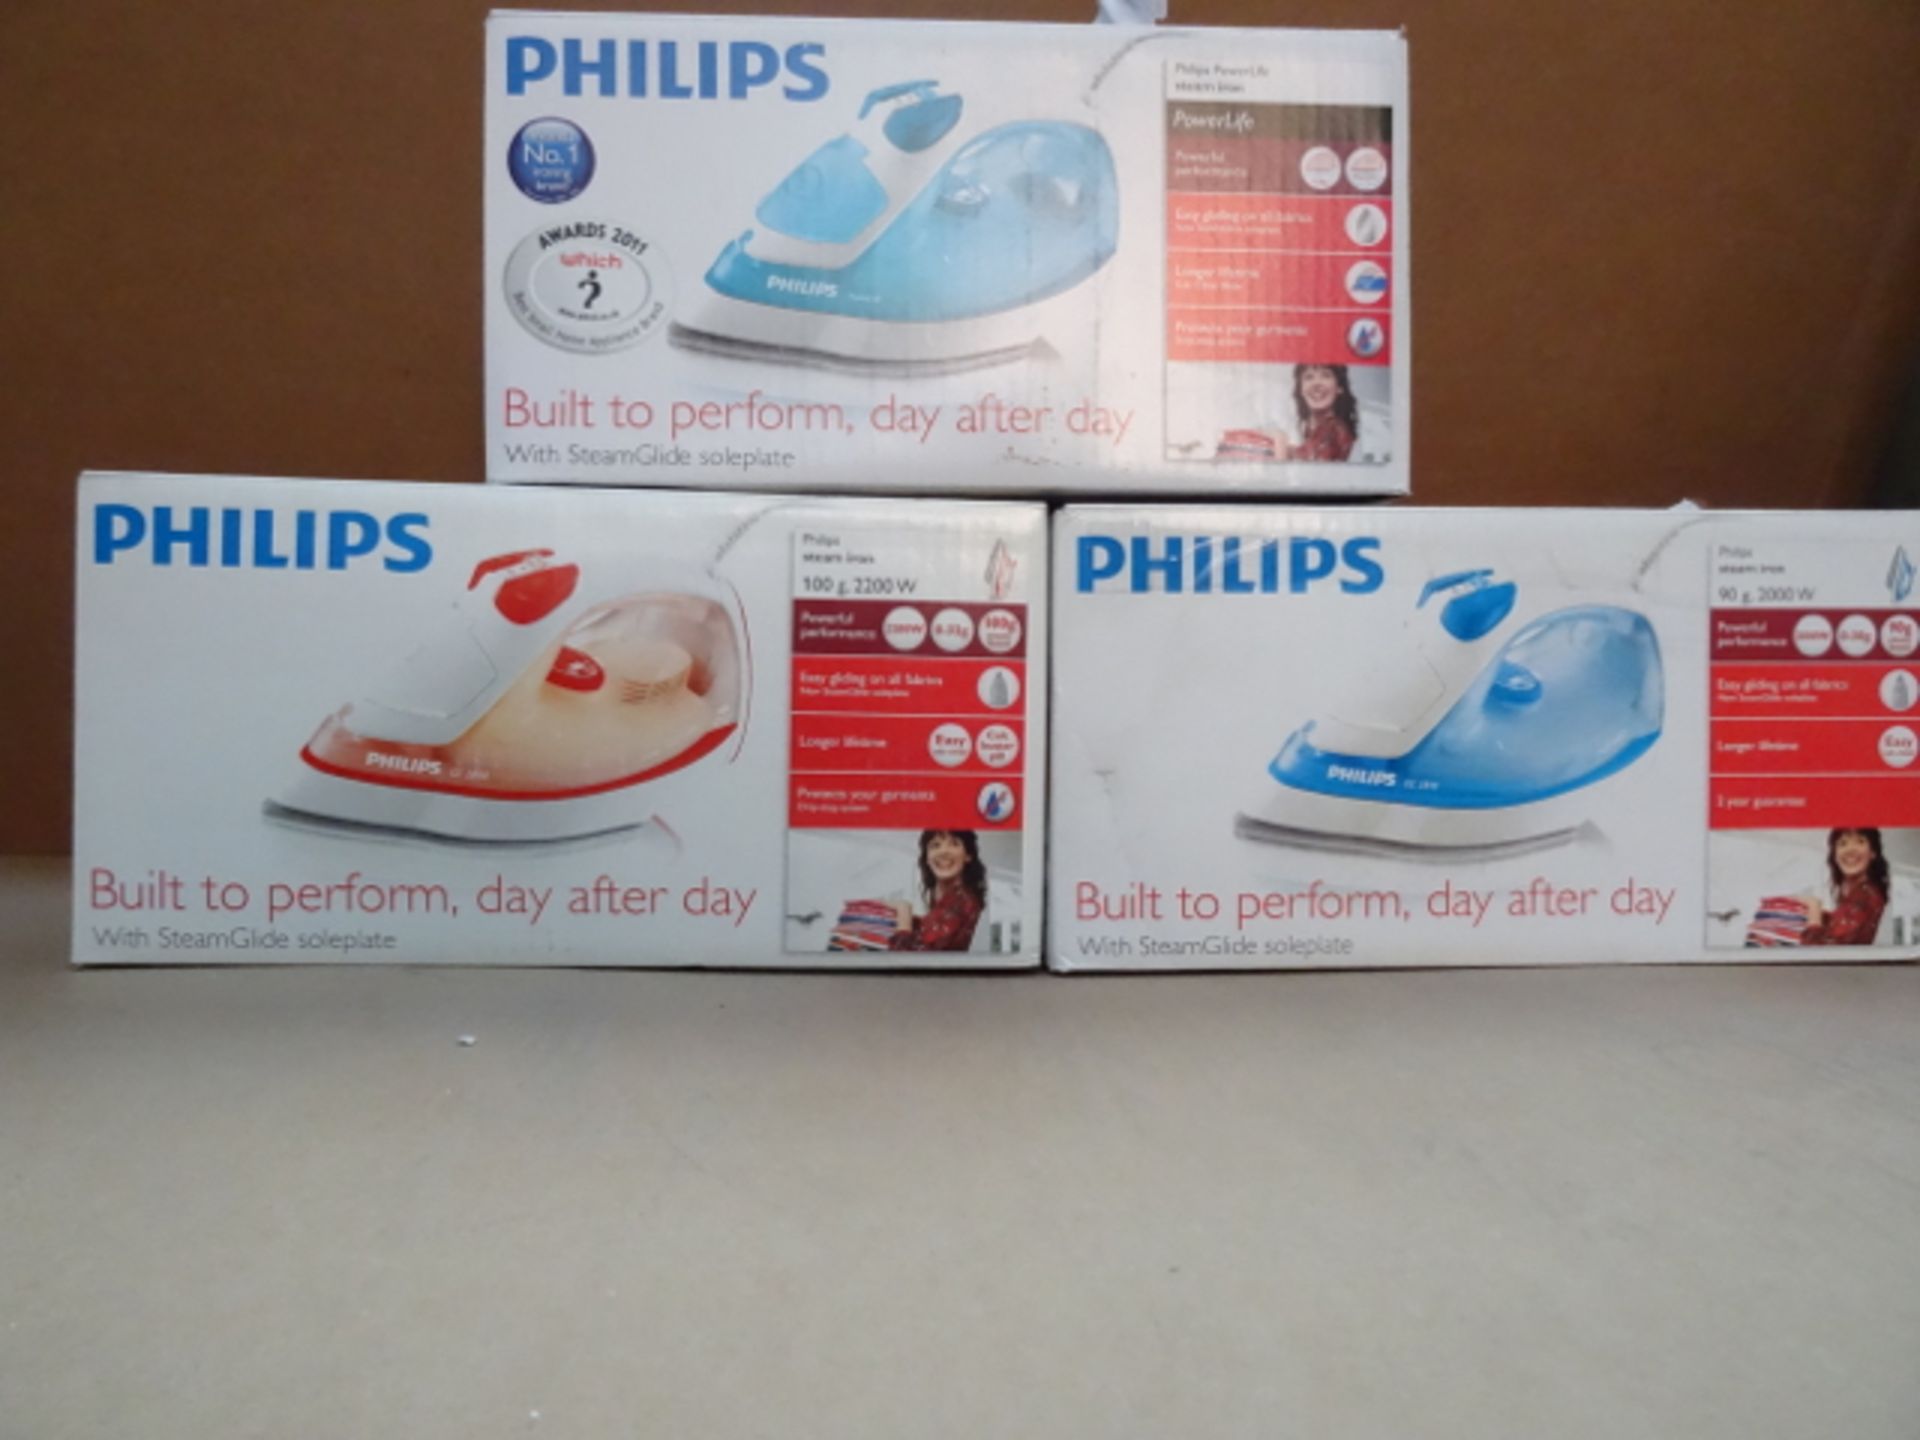 3 x Philips Steam Irons. High Quality. Approx RRP £50 Each! Total RRP £150! Unchecked/Untested boxed